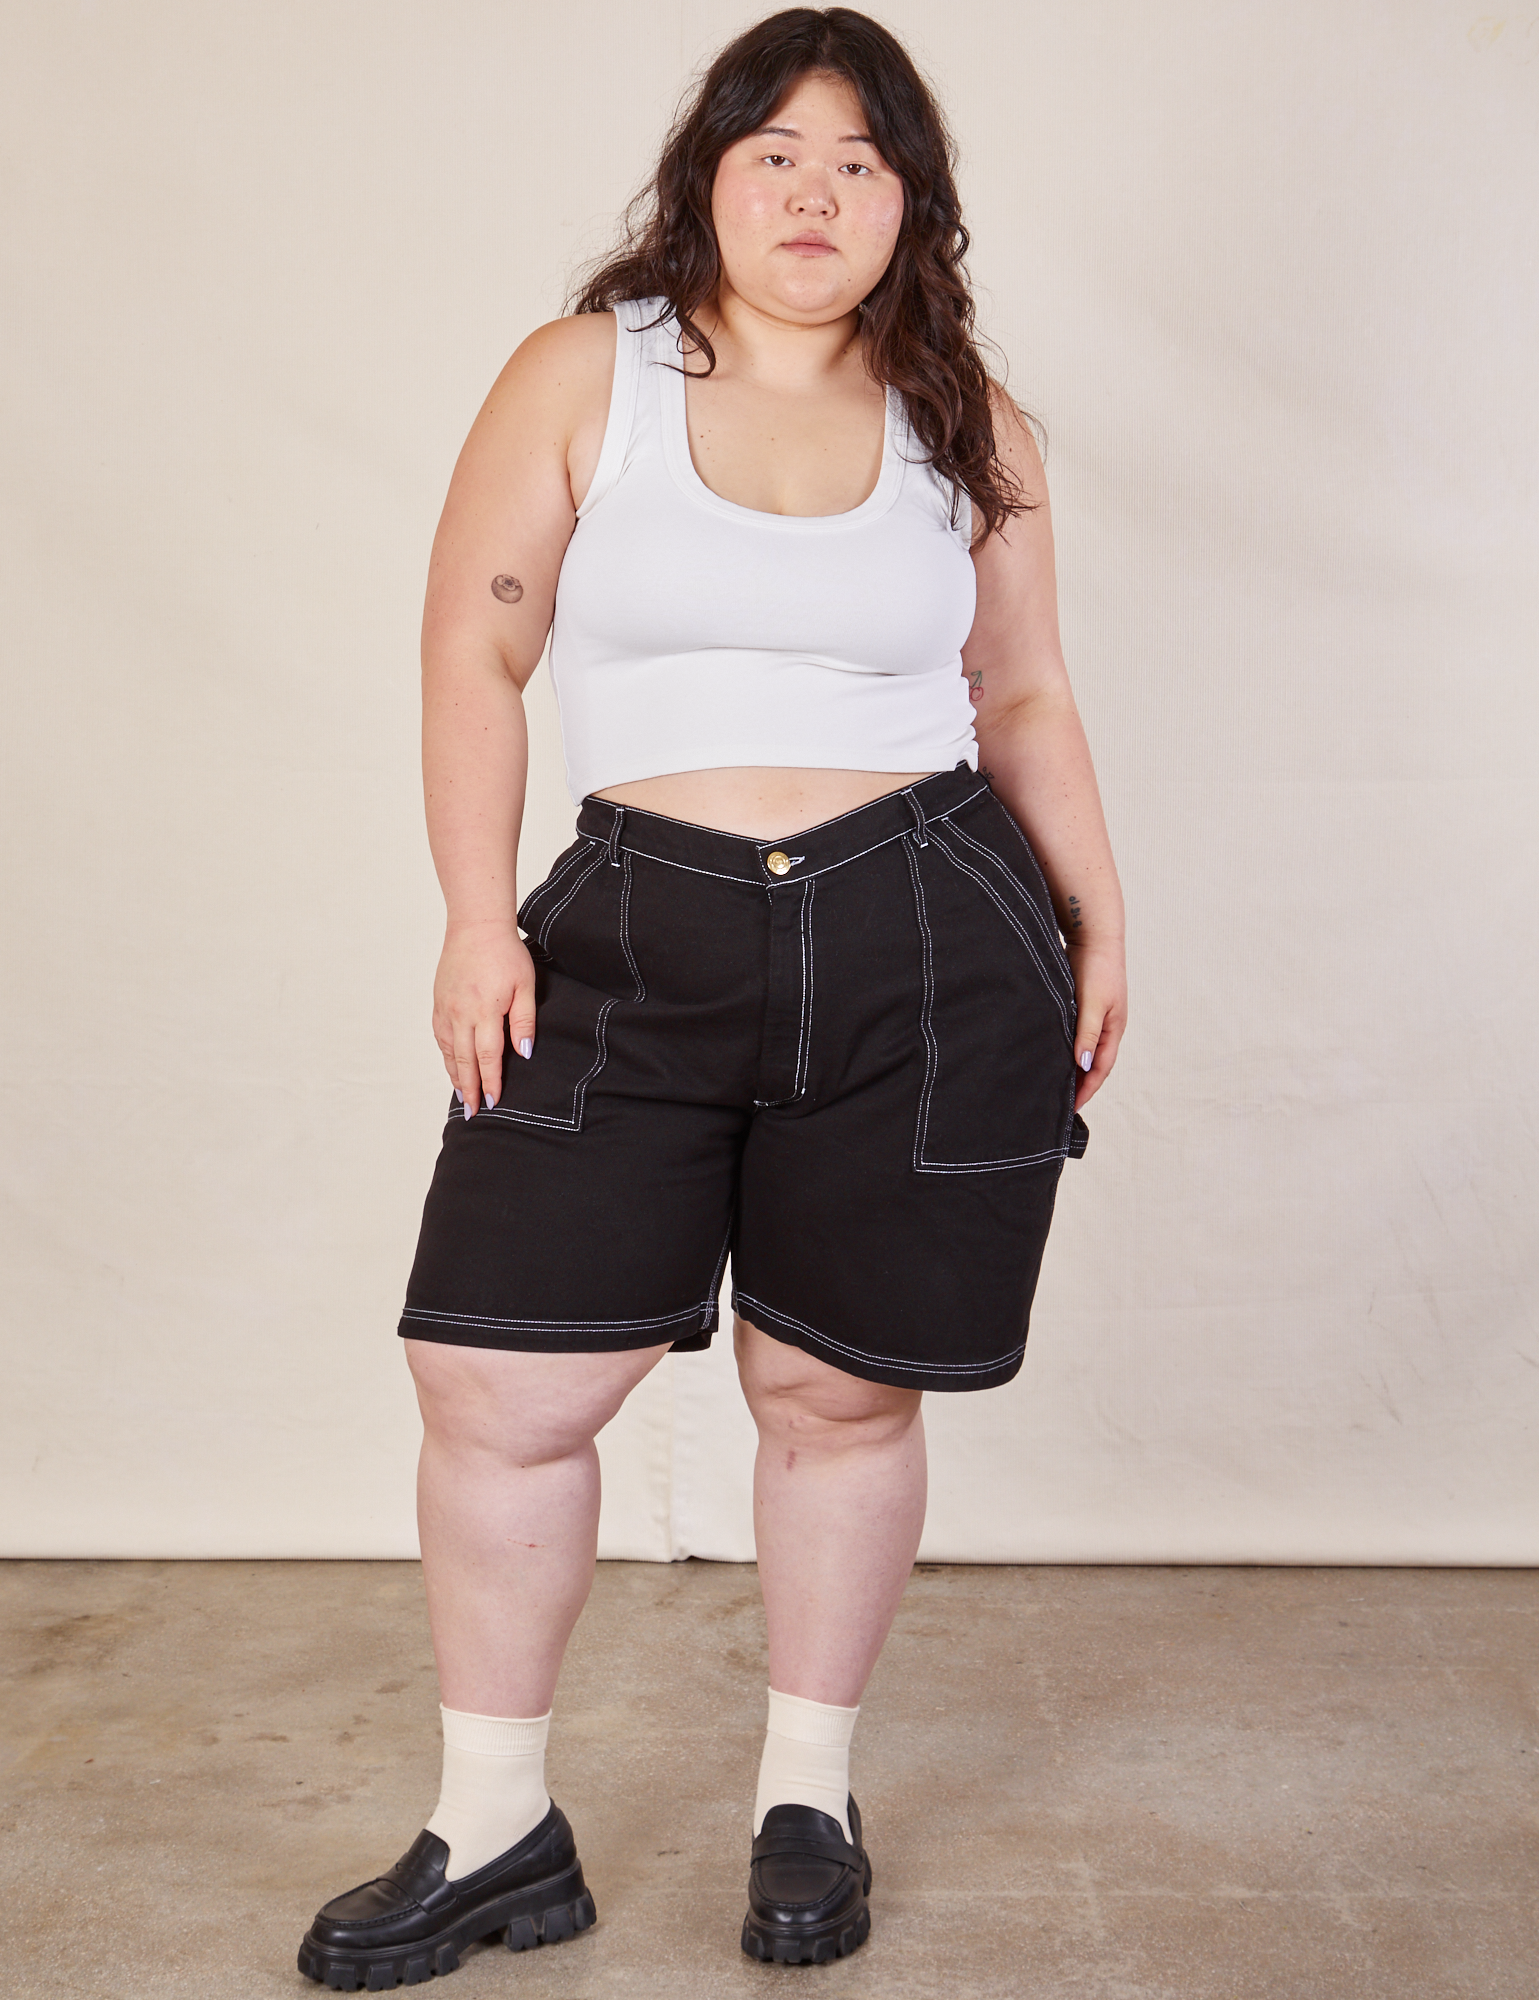 Ashley is 5'7" and wearing 1XL Carpenter Shorts in Basic Black paired with a Cropped Tank in vintage tee off-white